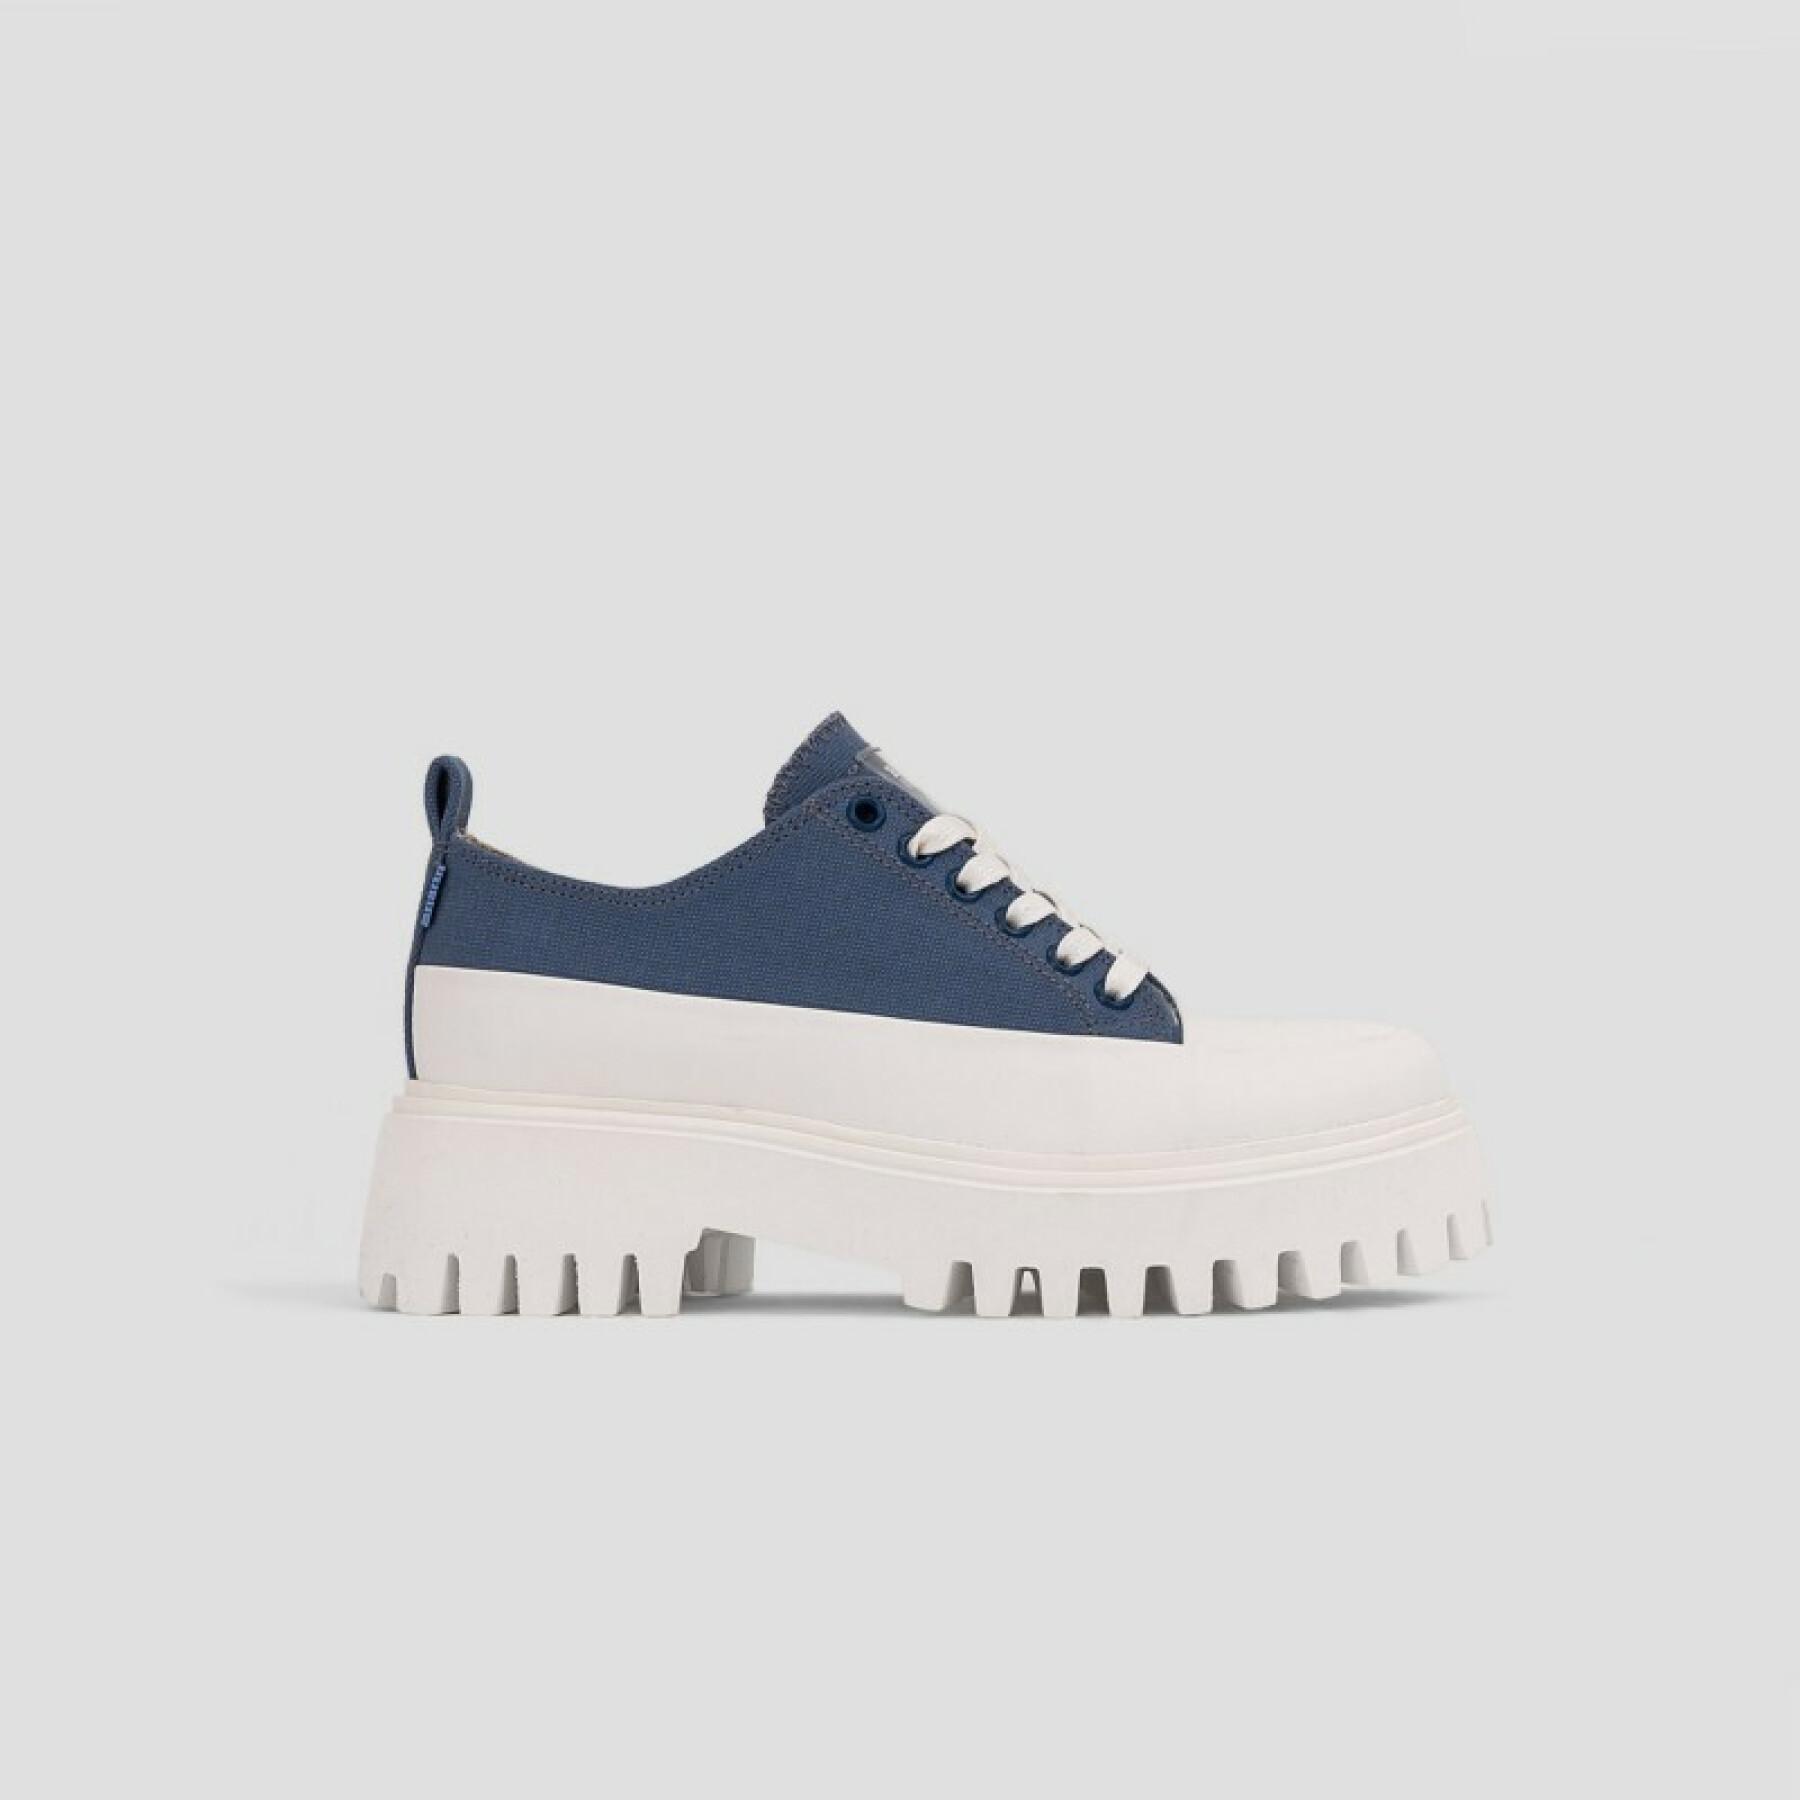 Women's sneakers Bronx Groov-y low lace up Canvas retro